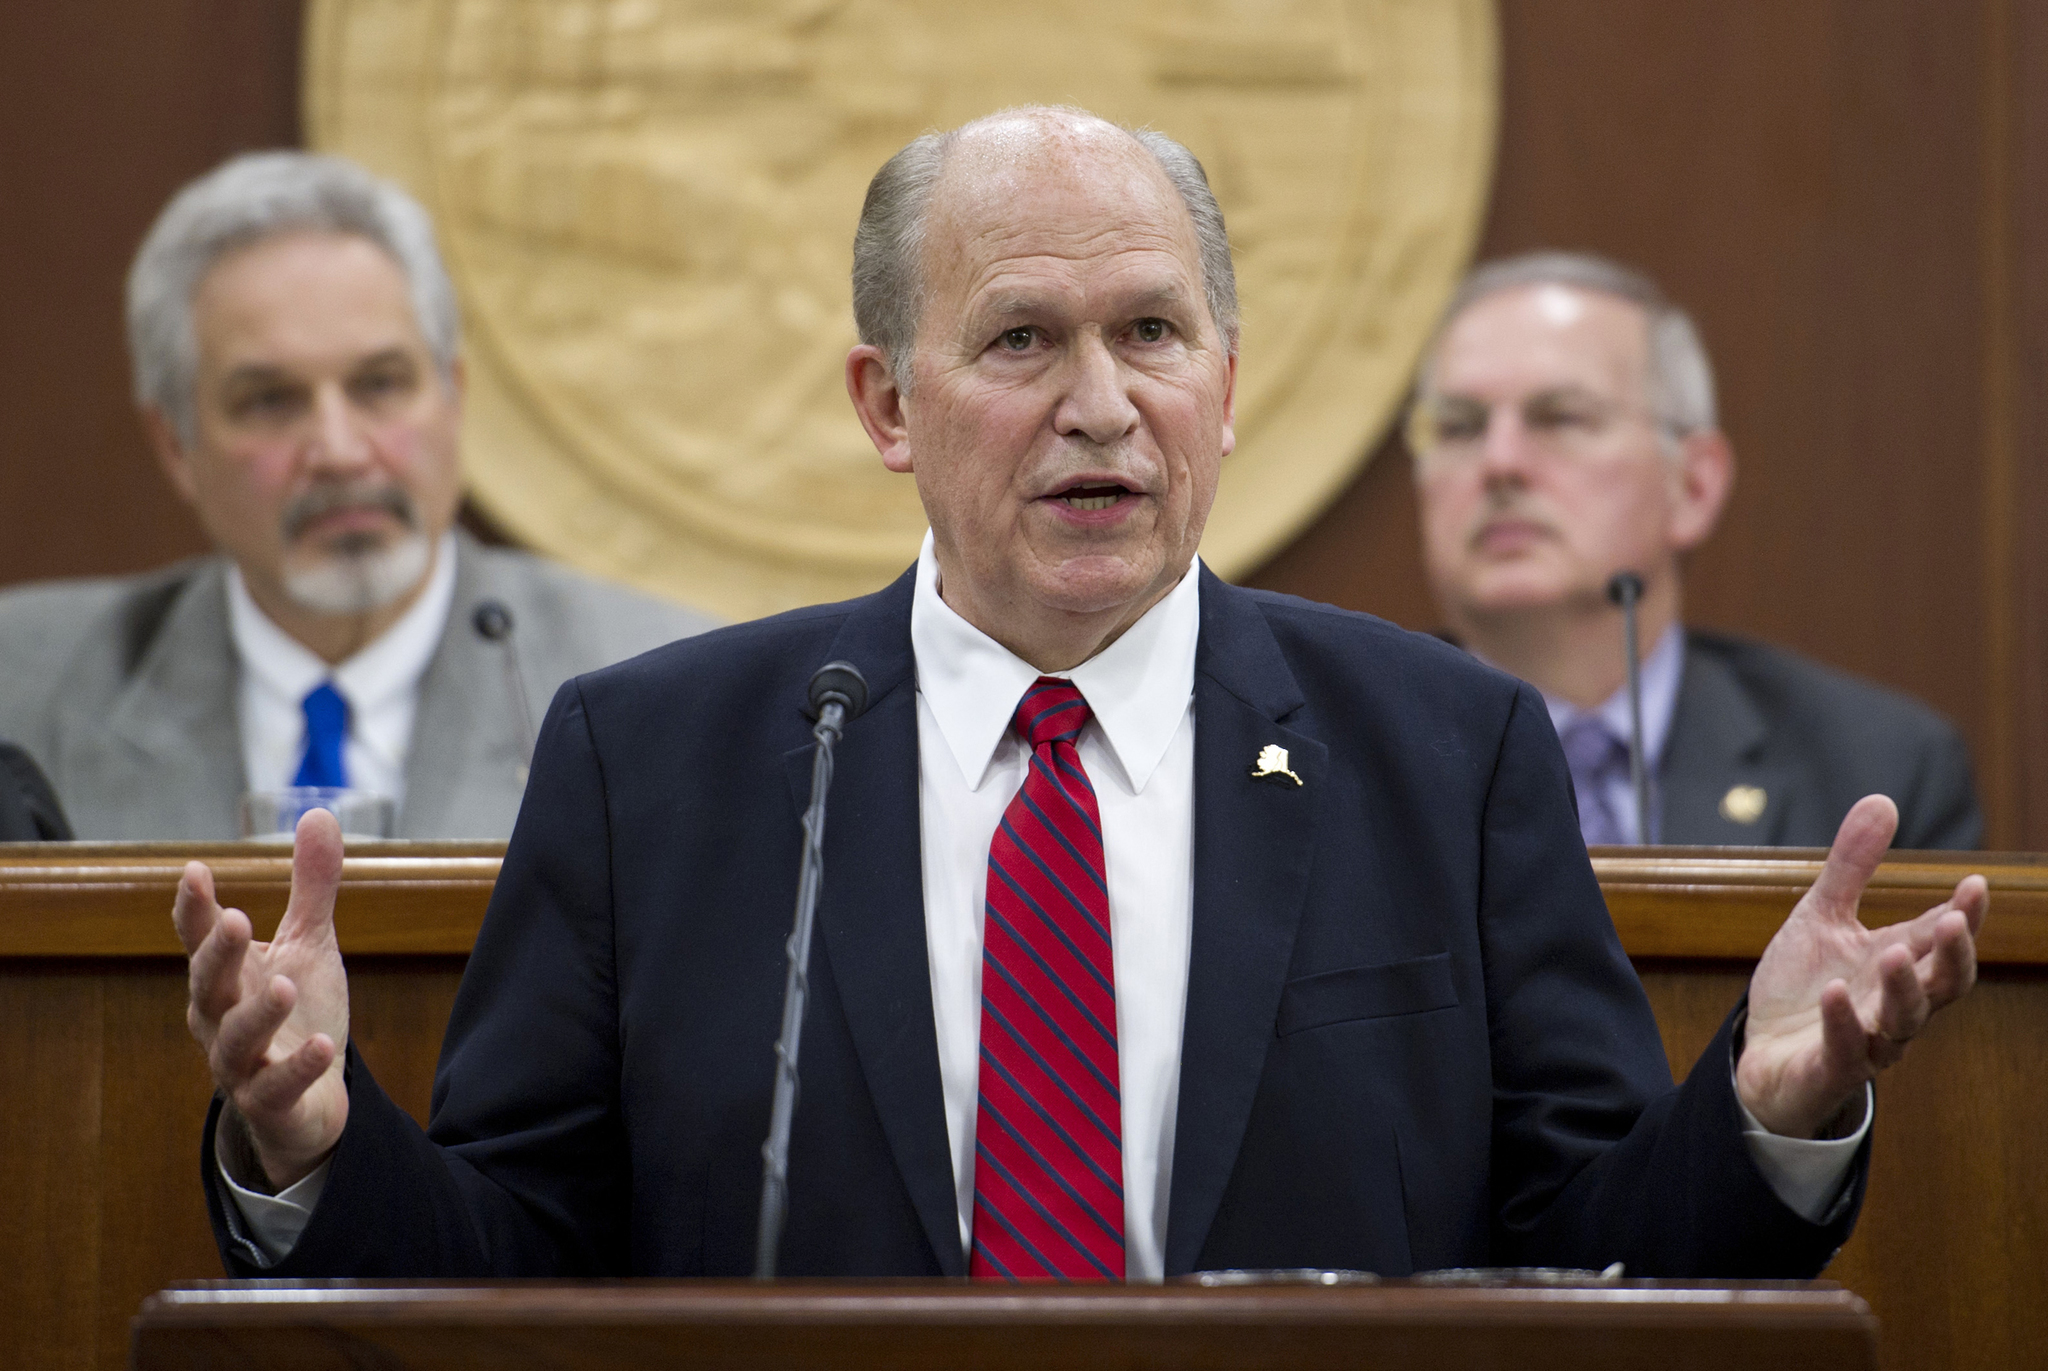 Gov. Bill Walker speaks during his State of the State address before a joint session of the Alaska Legislature at the Capitolon Wednesday, Jan. 18, 2017. Senate President Pete Kelly, R-Fairbanks, left, and Speaker of the House Bryce Edgmon, D-Dillingham, watch from the Speakers desk in the background. (Michael Penn/Juneau Empire)